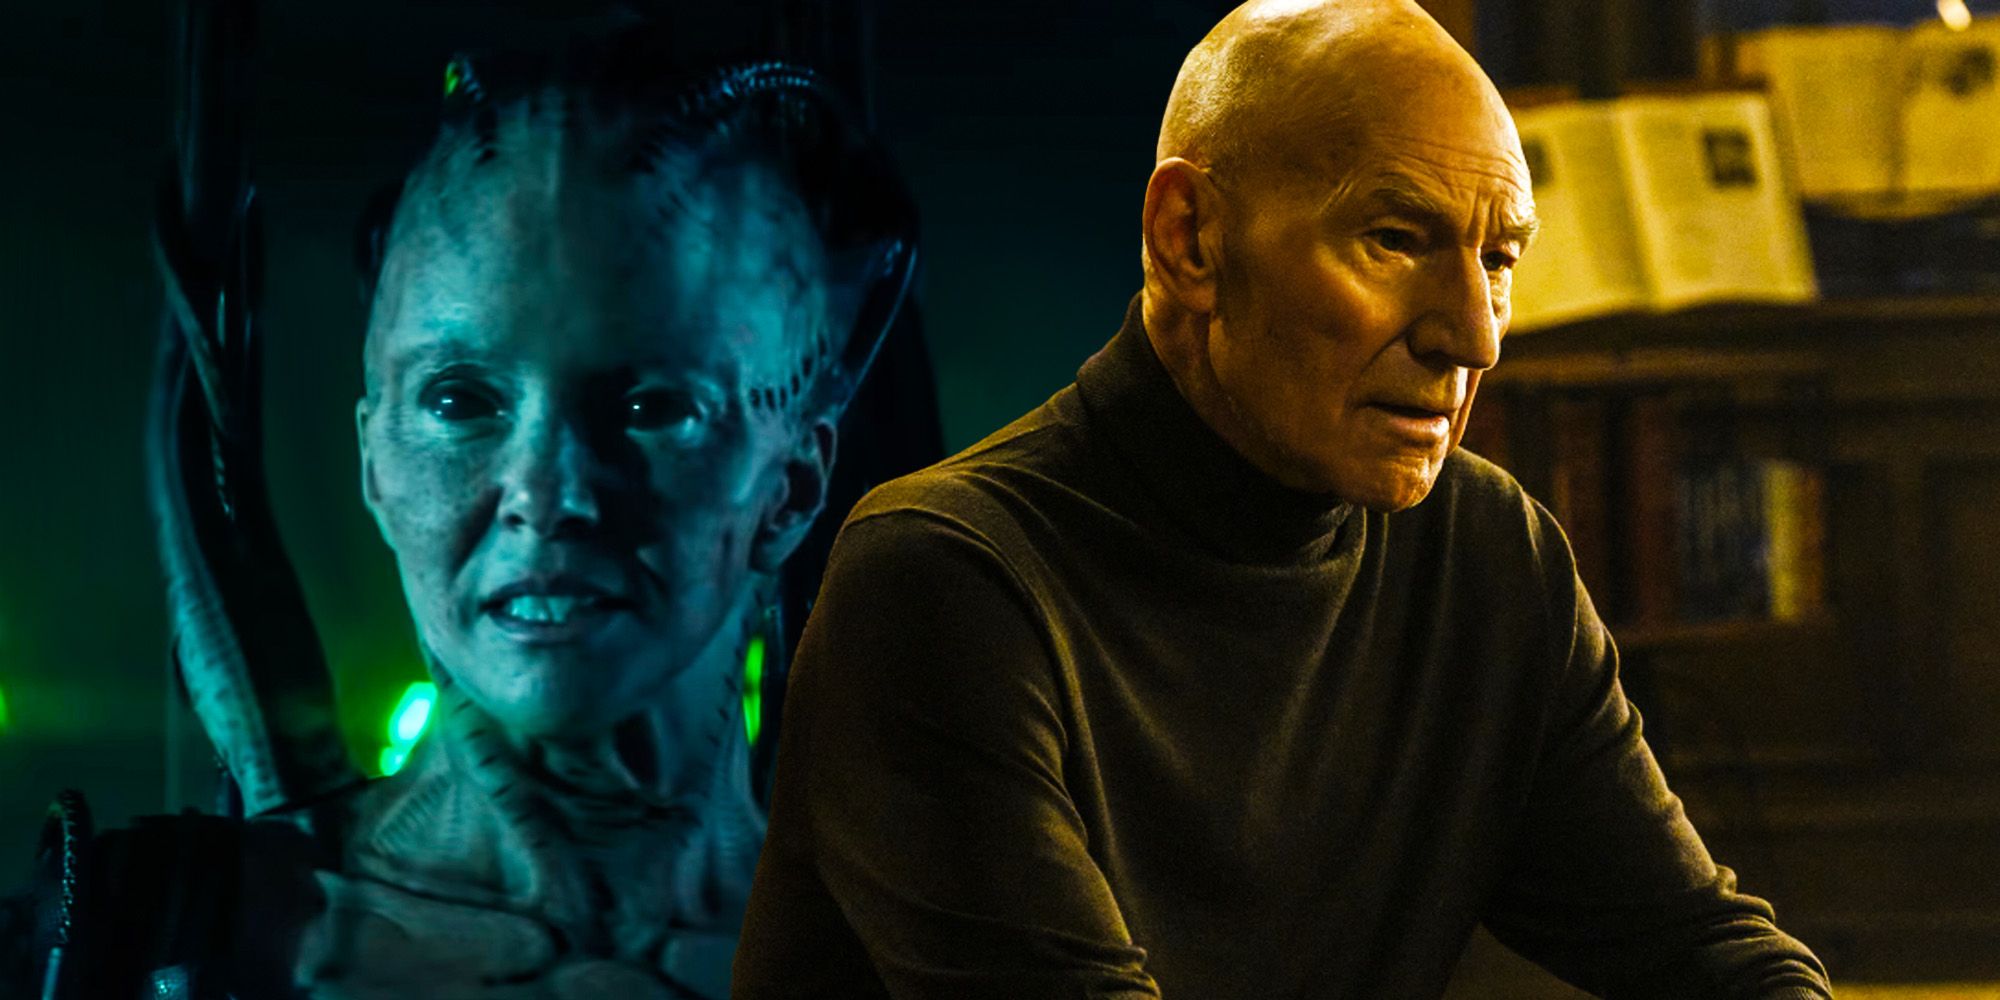 Star Trek Picard The borg queen defeating Picard federation weakness